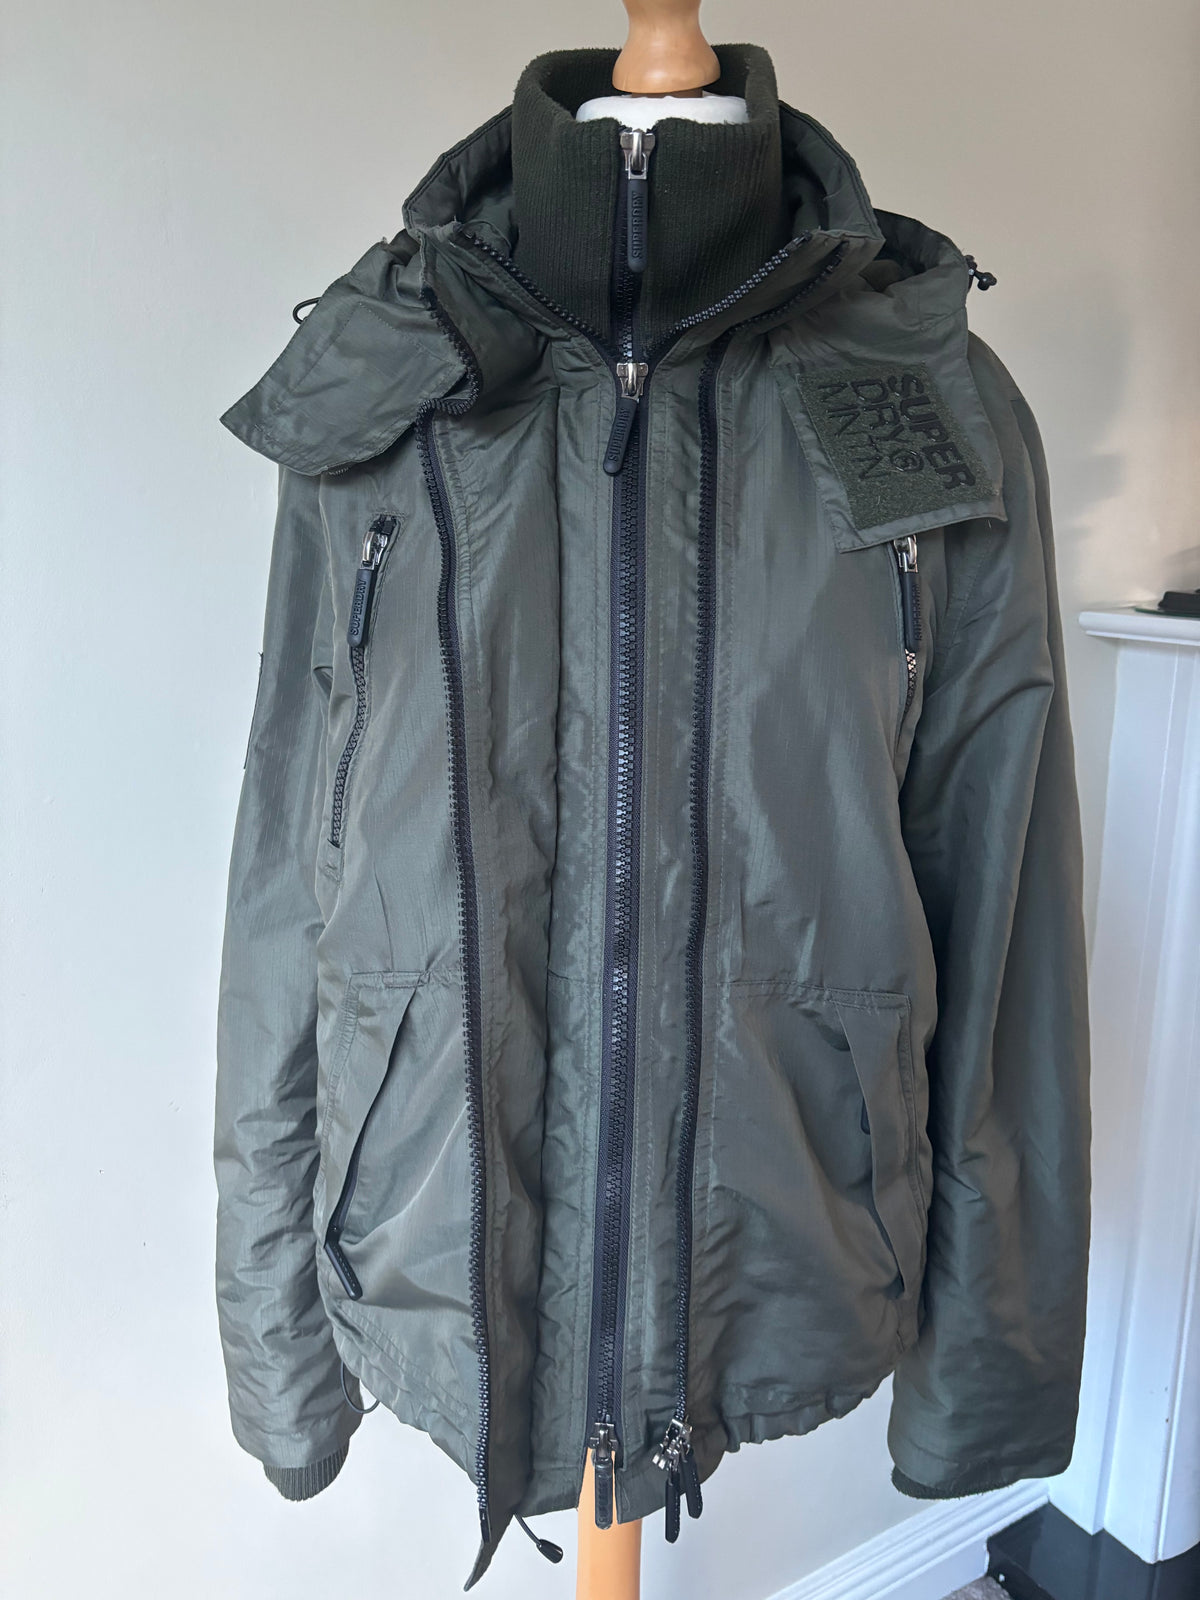 Wind Cheater Jacket by Superdry Size 16